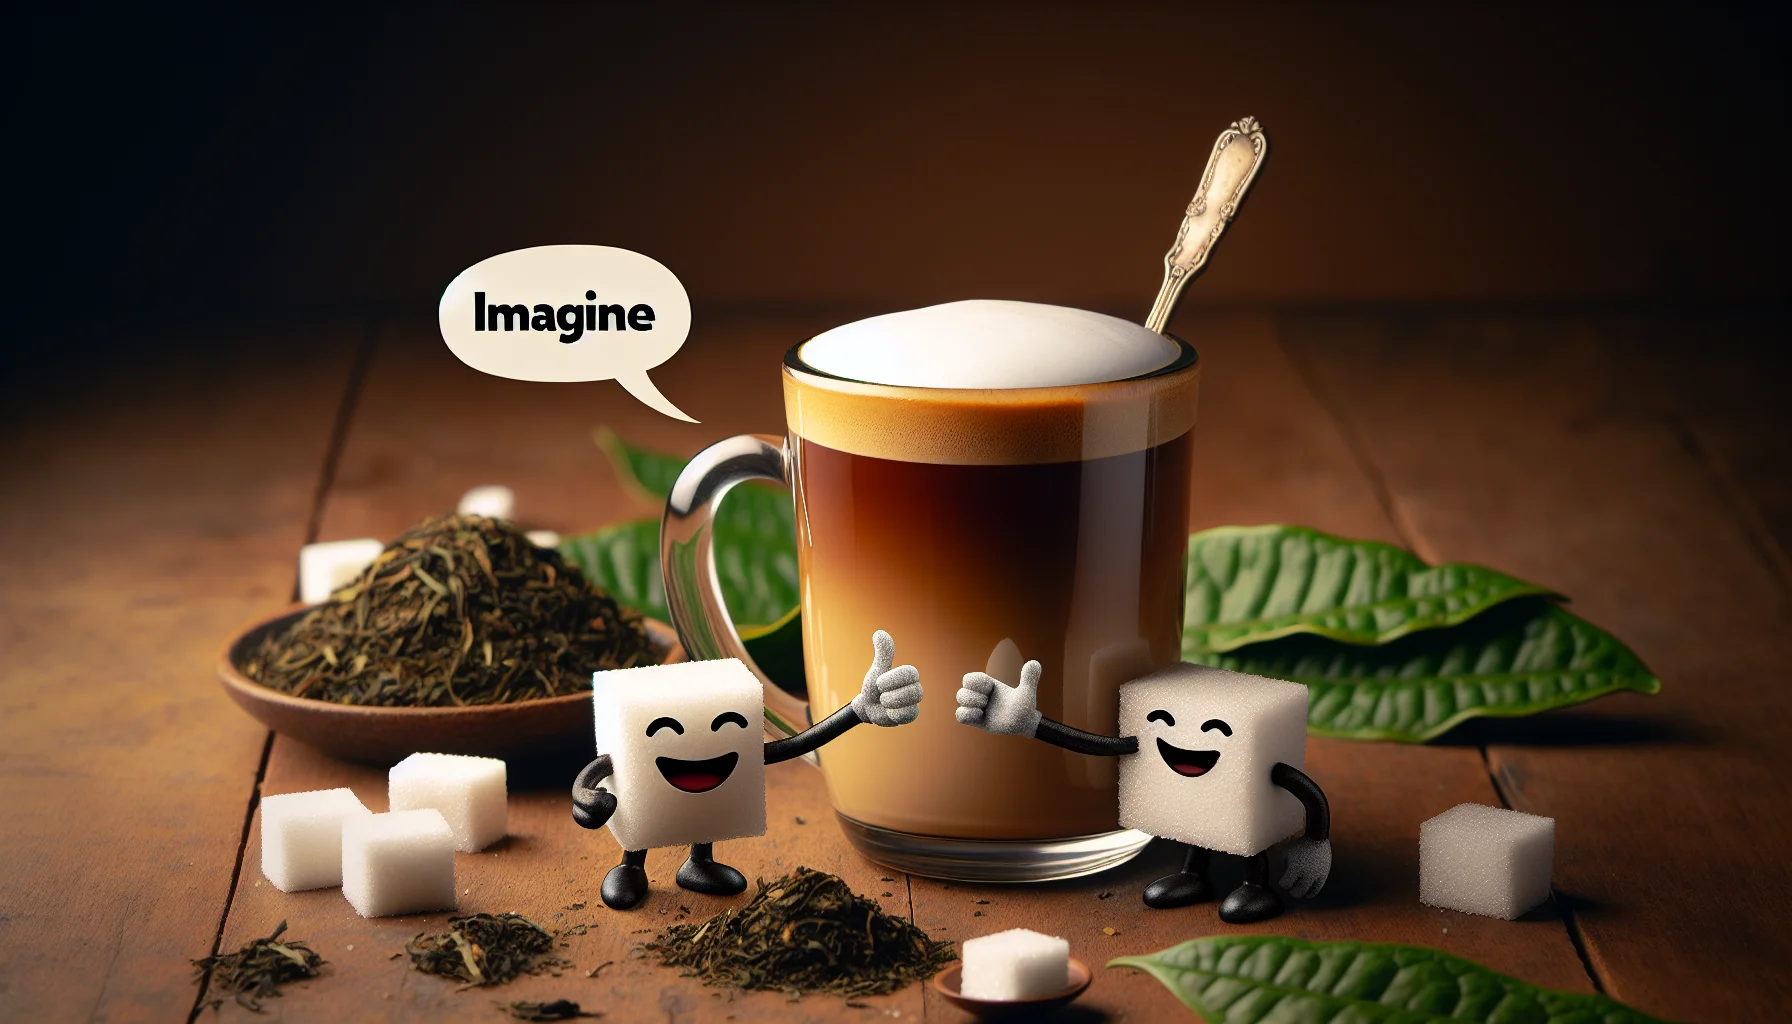 Imagine a comical and enticing scenario featuring a hojicha latte. The drink, a warm and inviting blend of roasted green tea and frothy milk, sits in a shiny, clear glass mug. It's placed on a rustic wooden table. An anthropomorphized pair of sugar cubes are depicted giving it a gleeful thumbs up, as though encouraging prospective drinkers to indulge. Freshly roasted hojicha leaves are scattered whimsically around, adding to the charm of the scene. The vibe is playful and delightful, adding an extra dash of joy to an already delectable beverage.